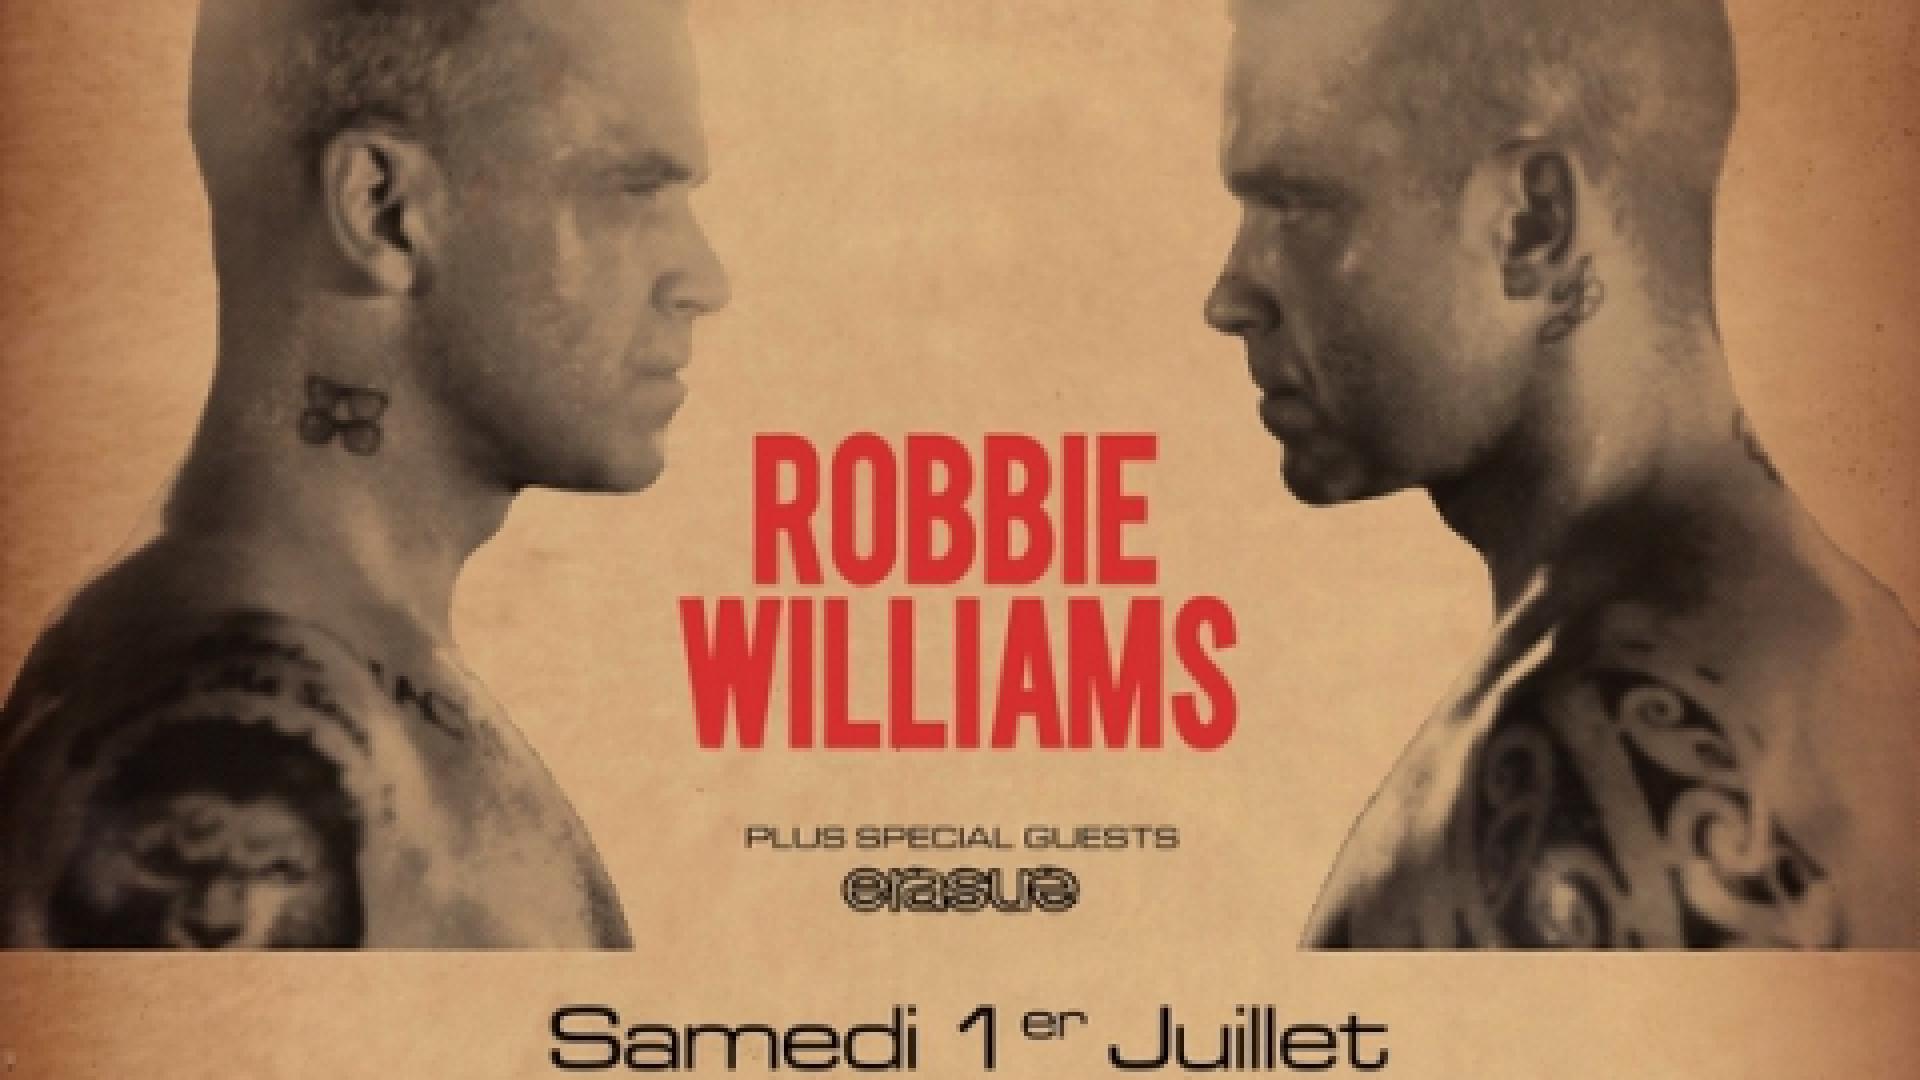 Robbie Williams in concert in Paris Bercy on July 01st, 2017 ! 